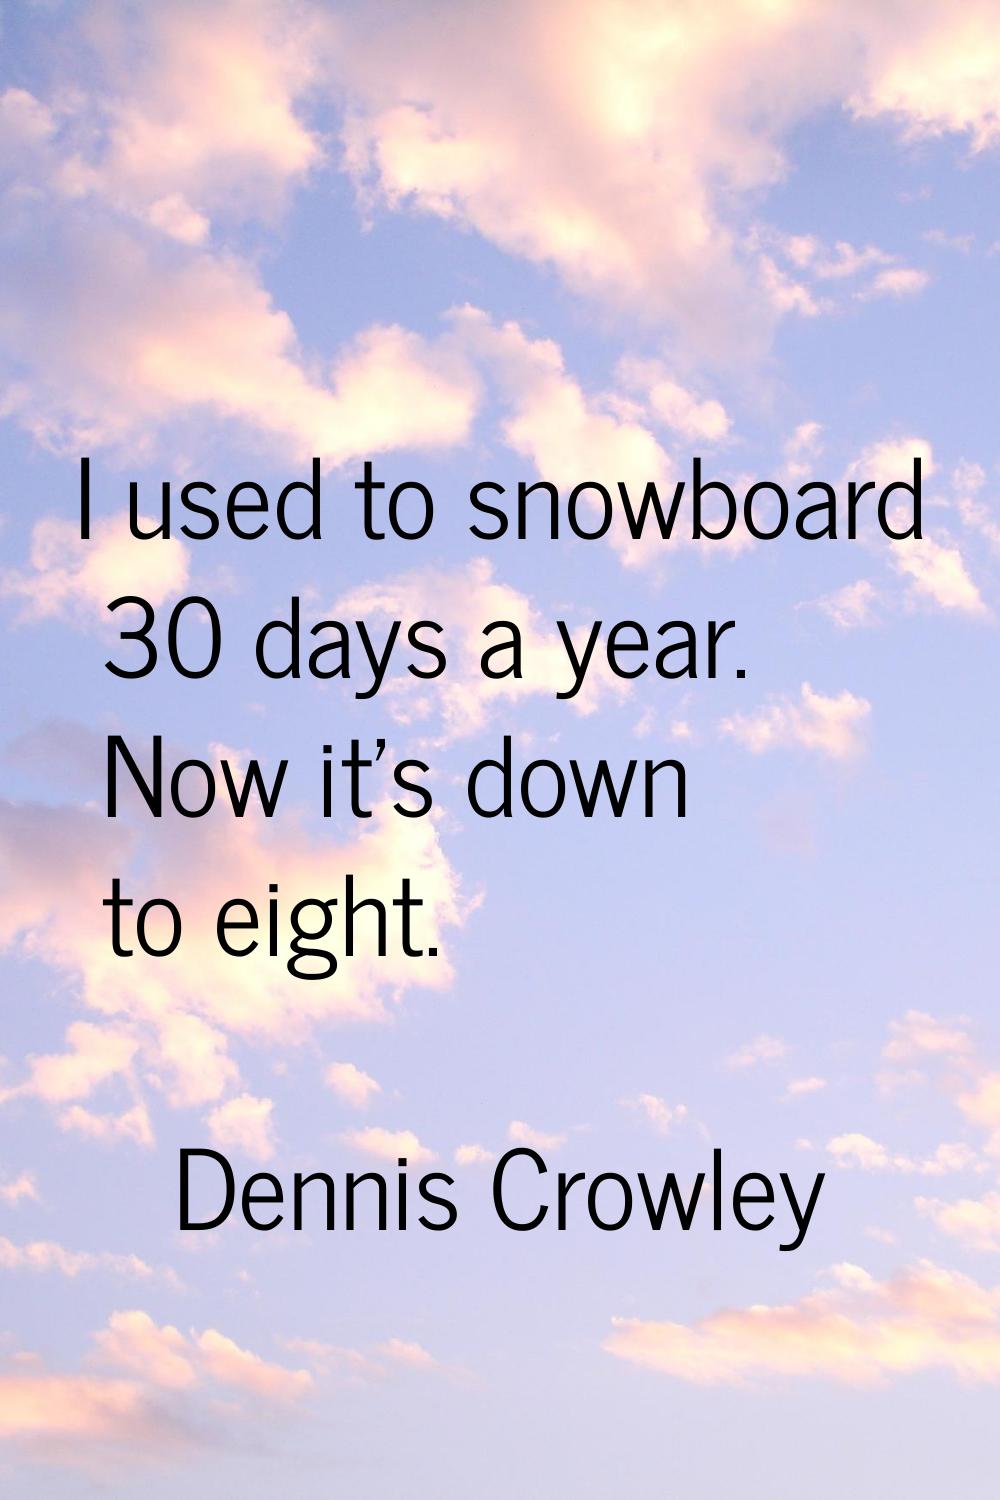 I used to snowboard 30 days a year. Now it's down to eight.